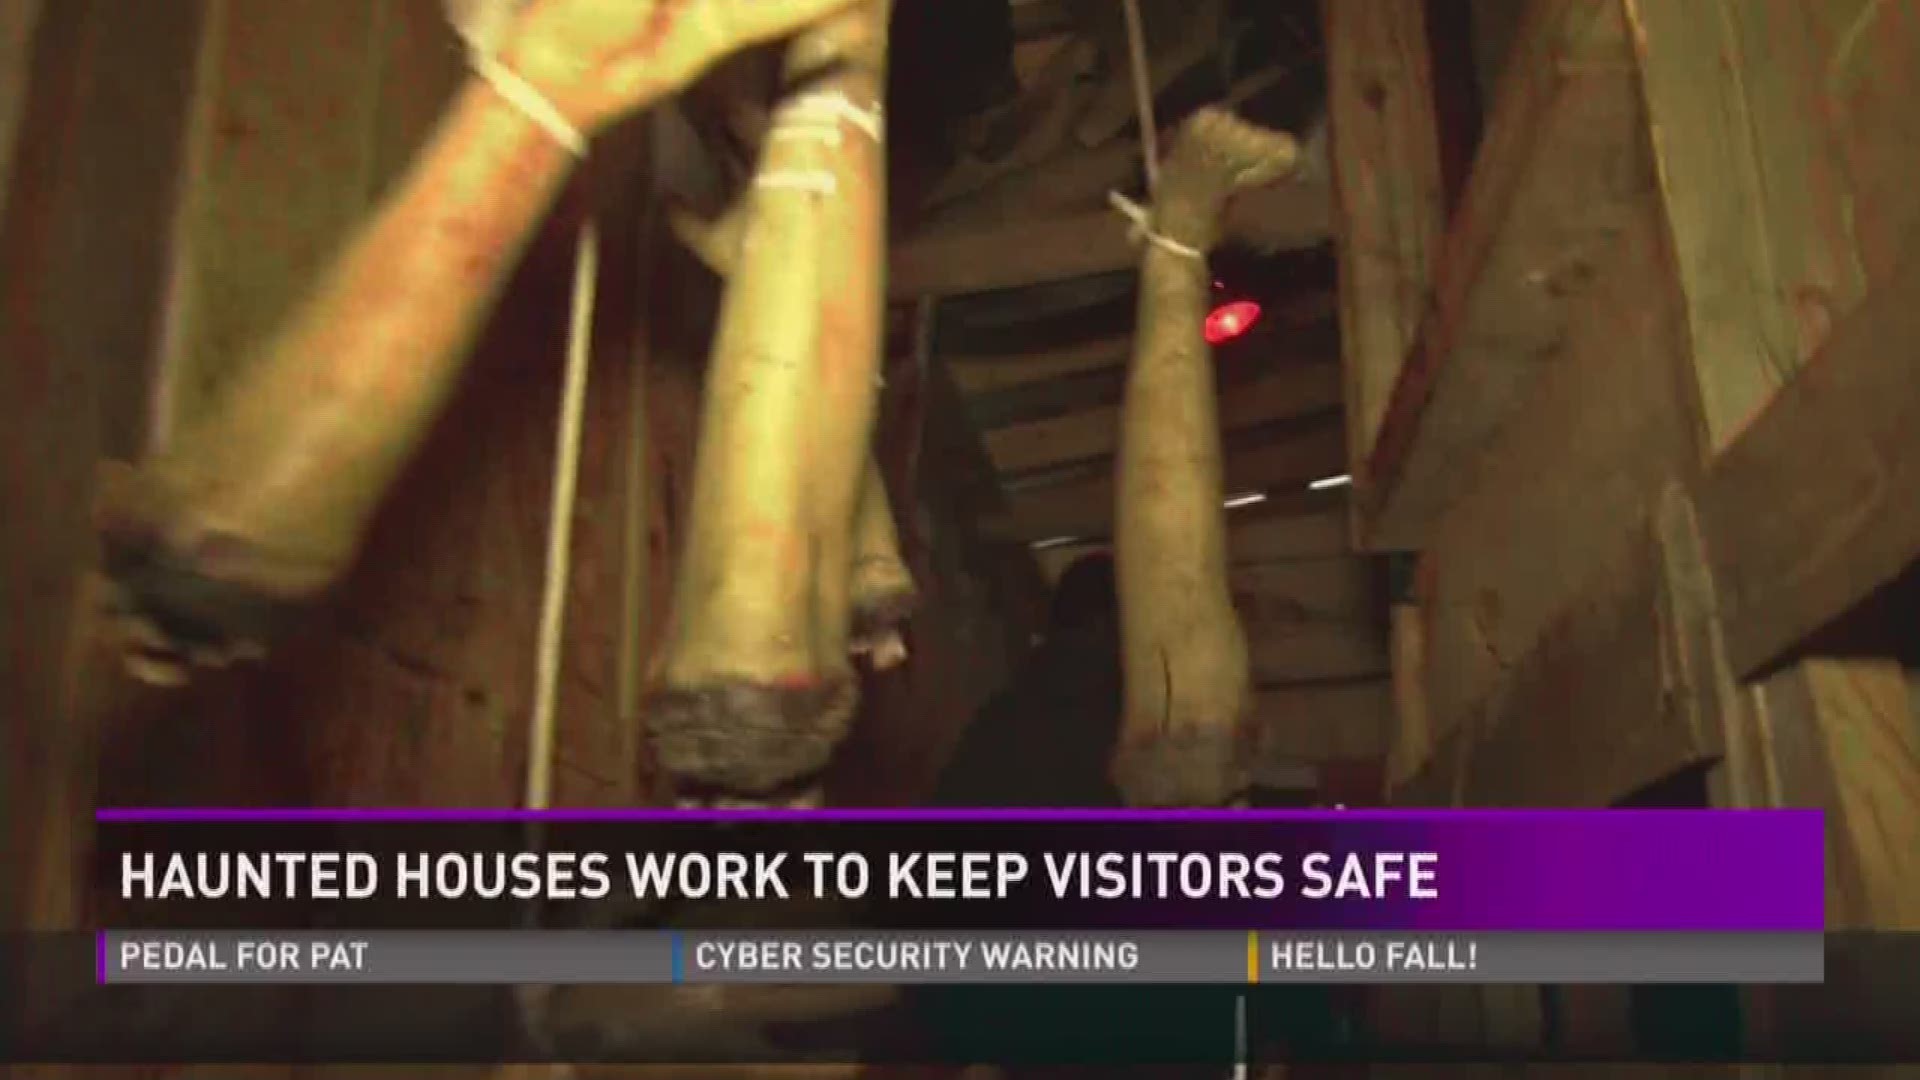 Haunted houses adhere to strict regulations in order to keep visitors safe while they are scared.